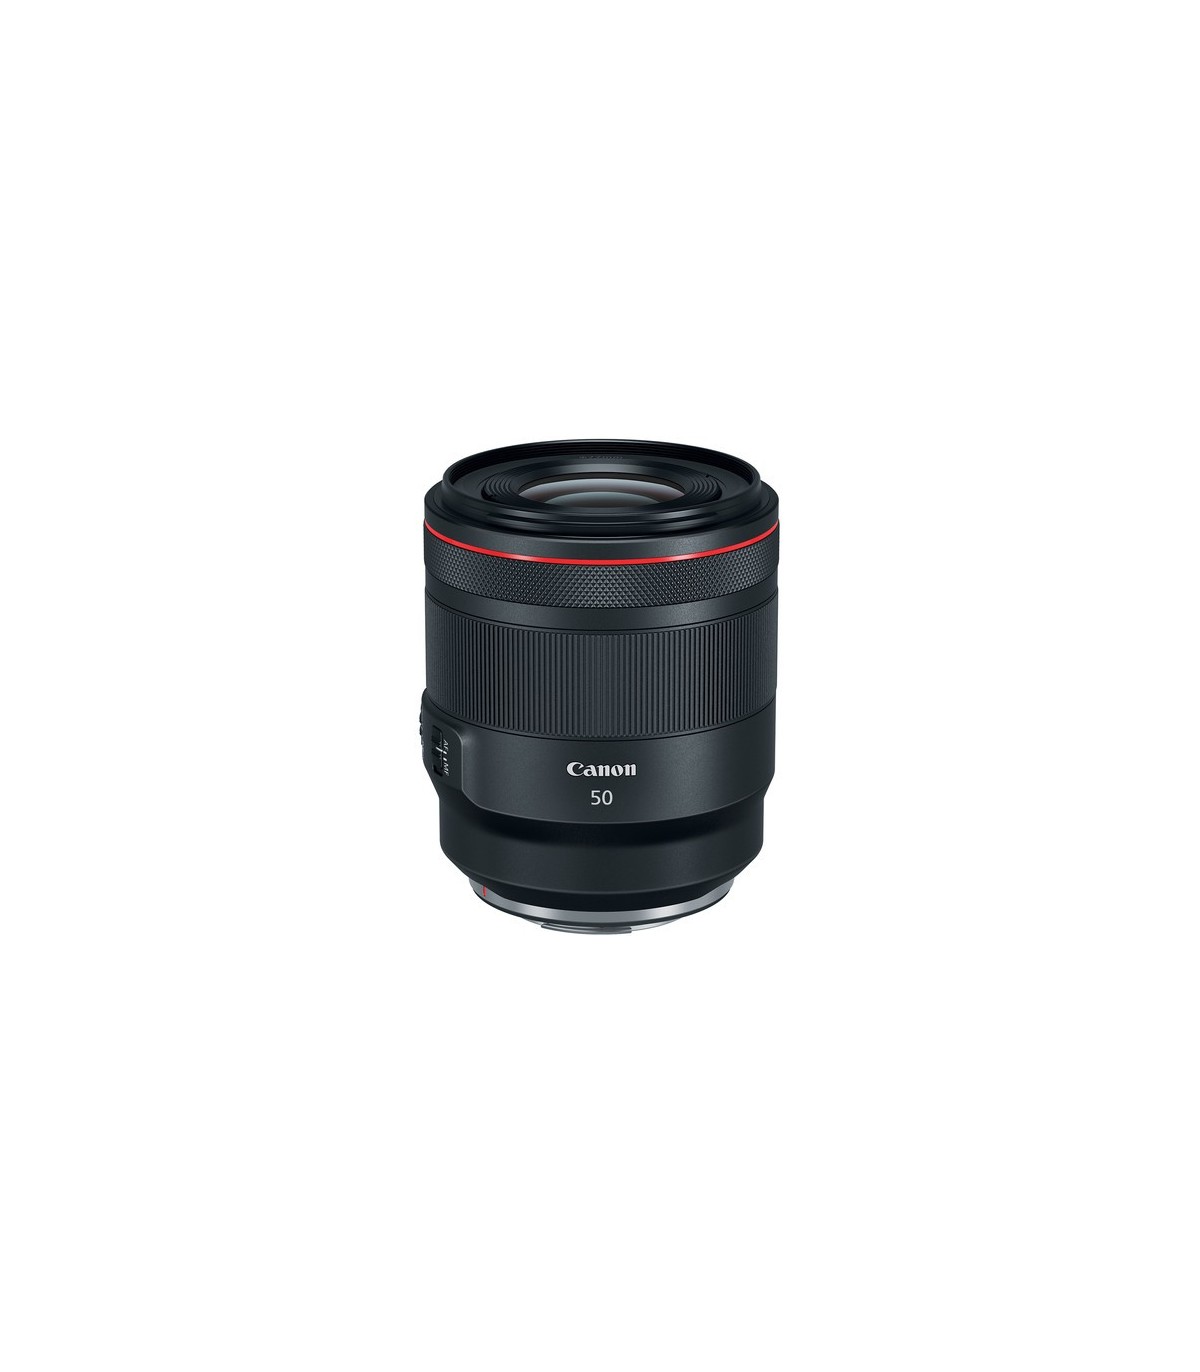 Canon 50mm F1.2 Dubai - Buy Canon RF Lens From Authorized UAE Reseller